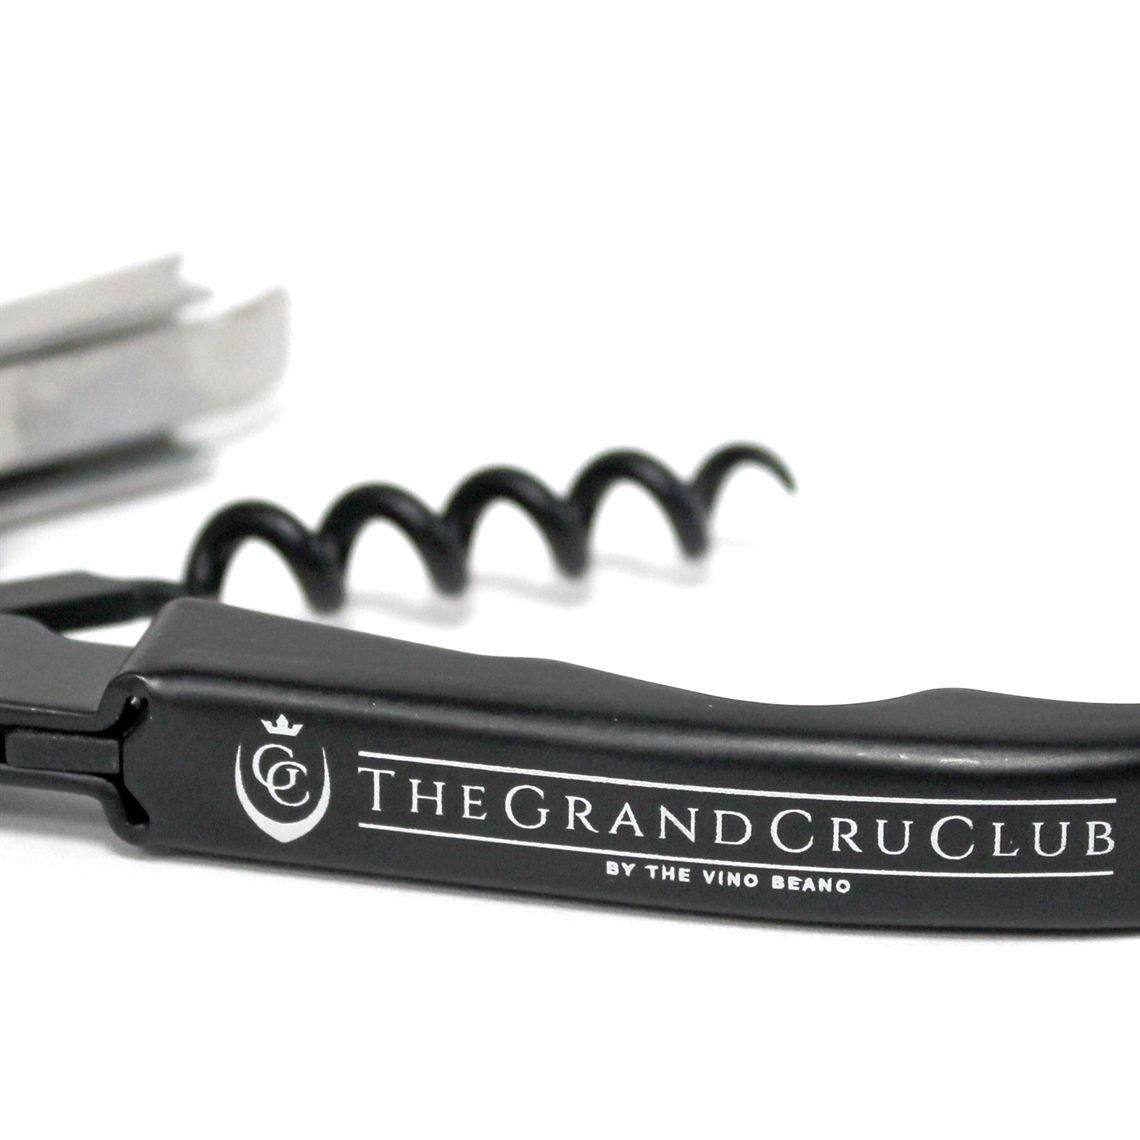 View more pulltex from our Branded Corkscrews & Bottle Openers range